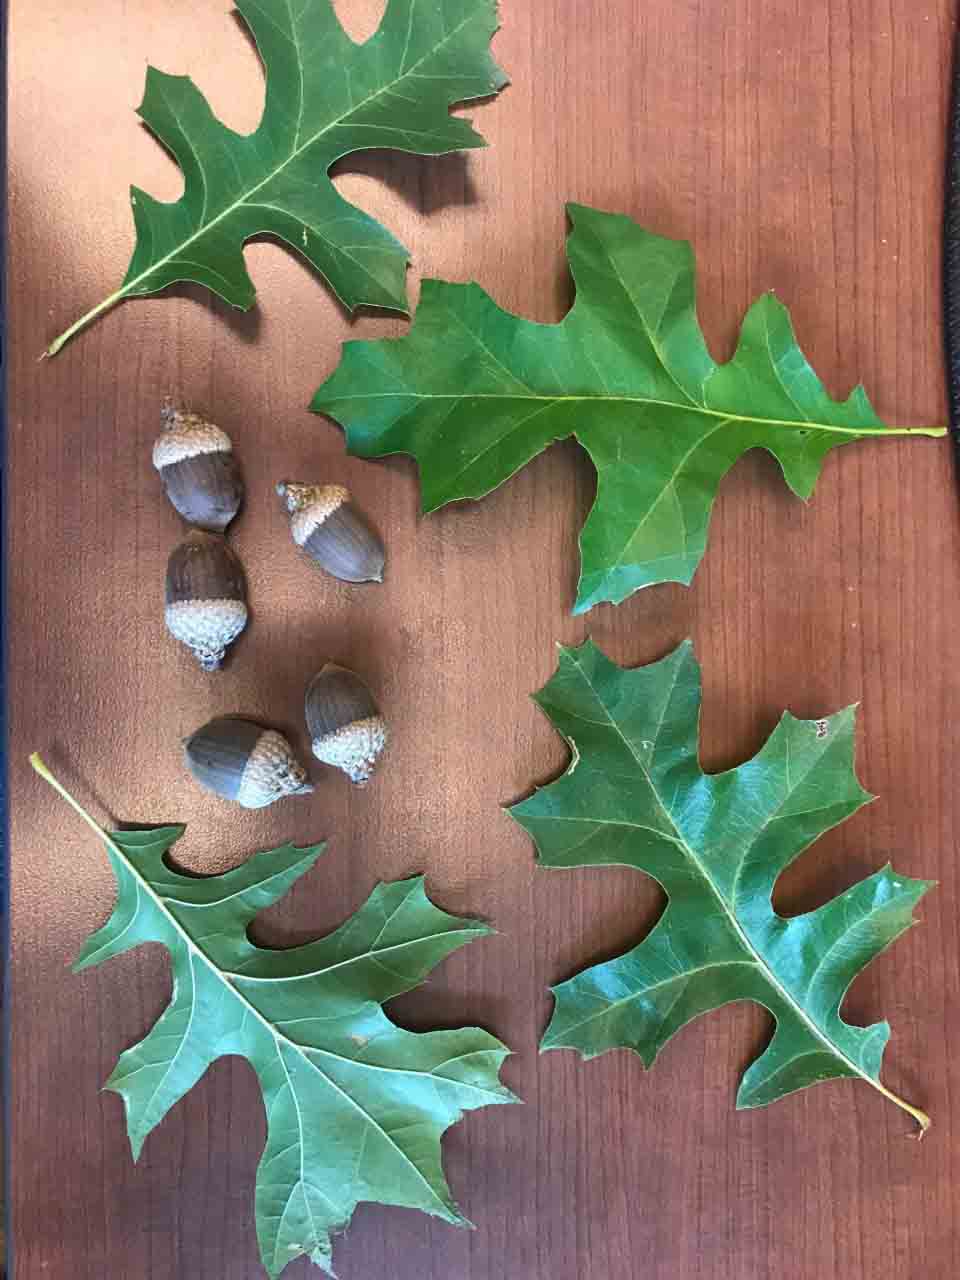 Nuttall oak acorns with leaves